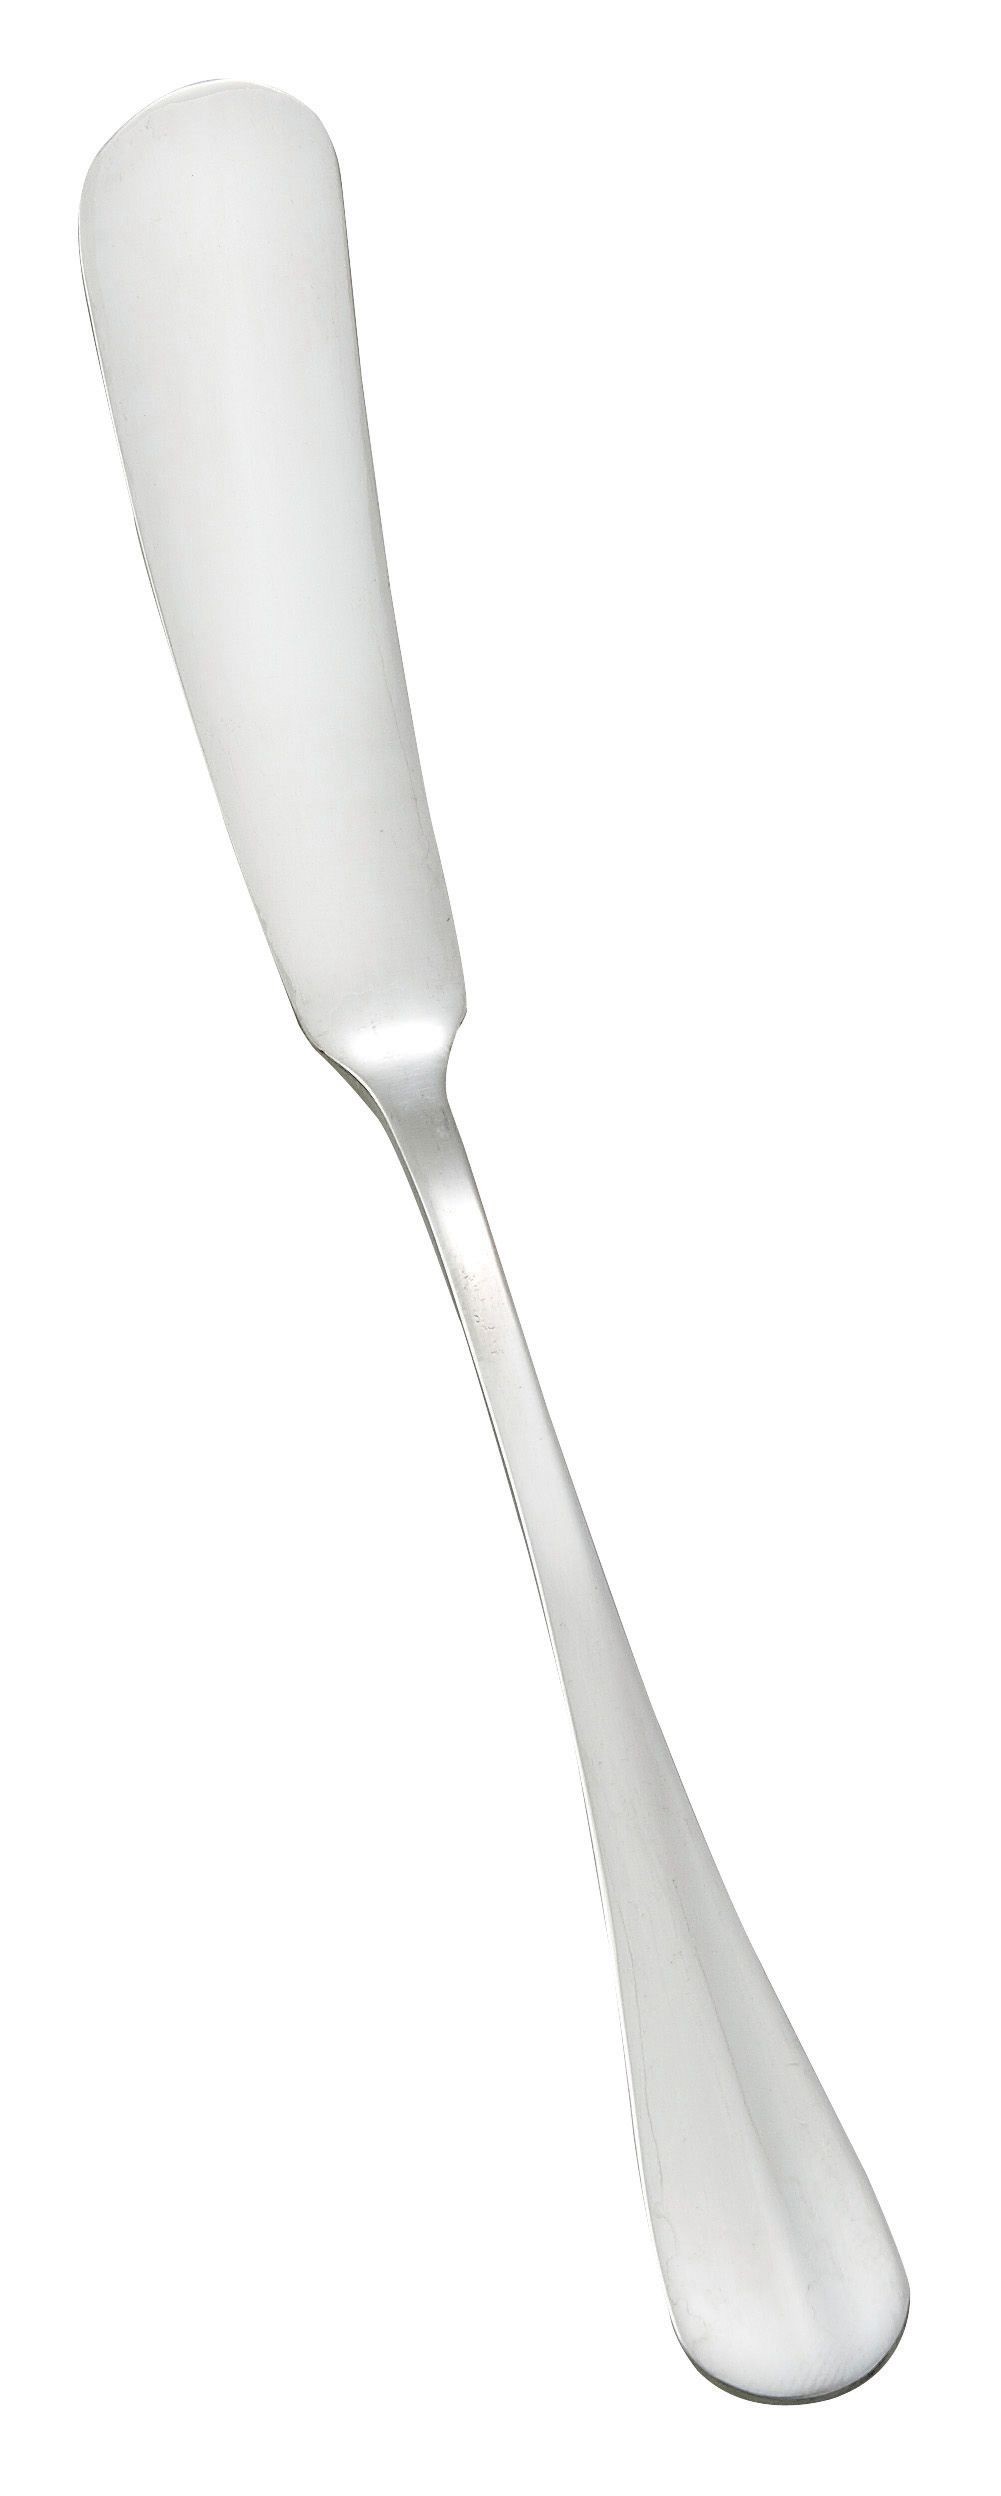 Winco 0034-12 Stanford Extra Heavy Stainless Steel Butter Spreader (12/Pack)